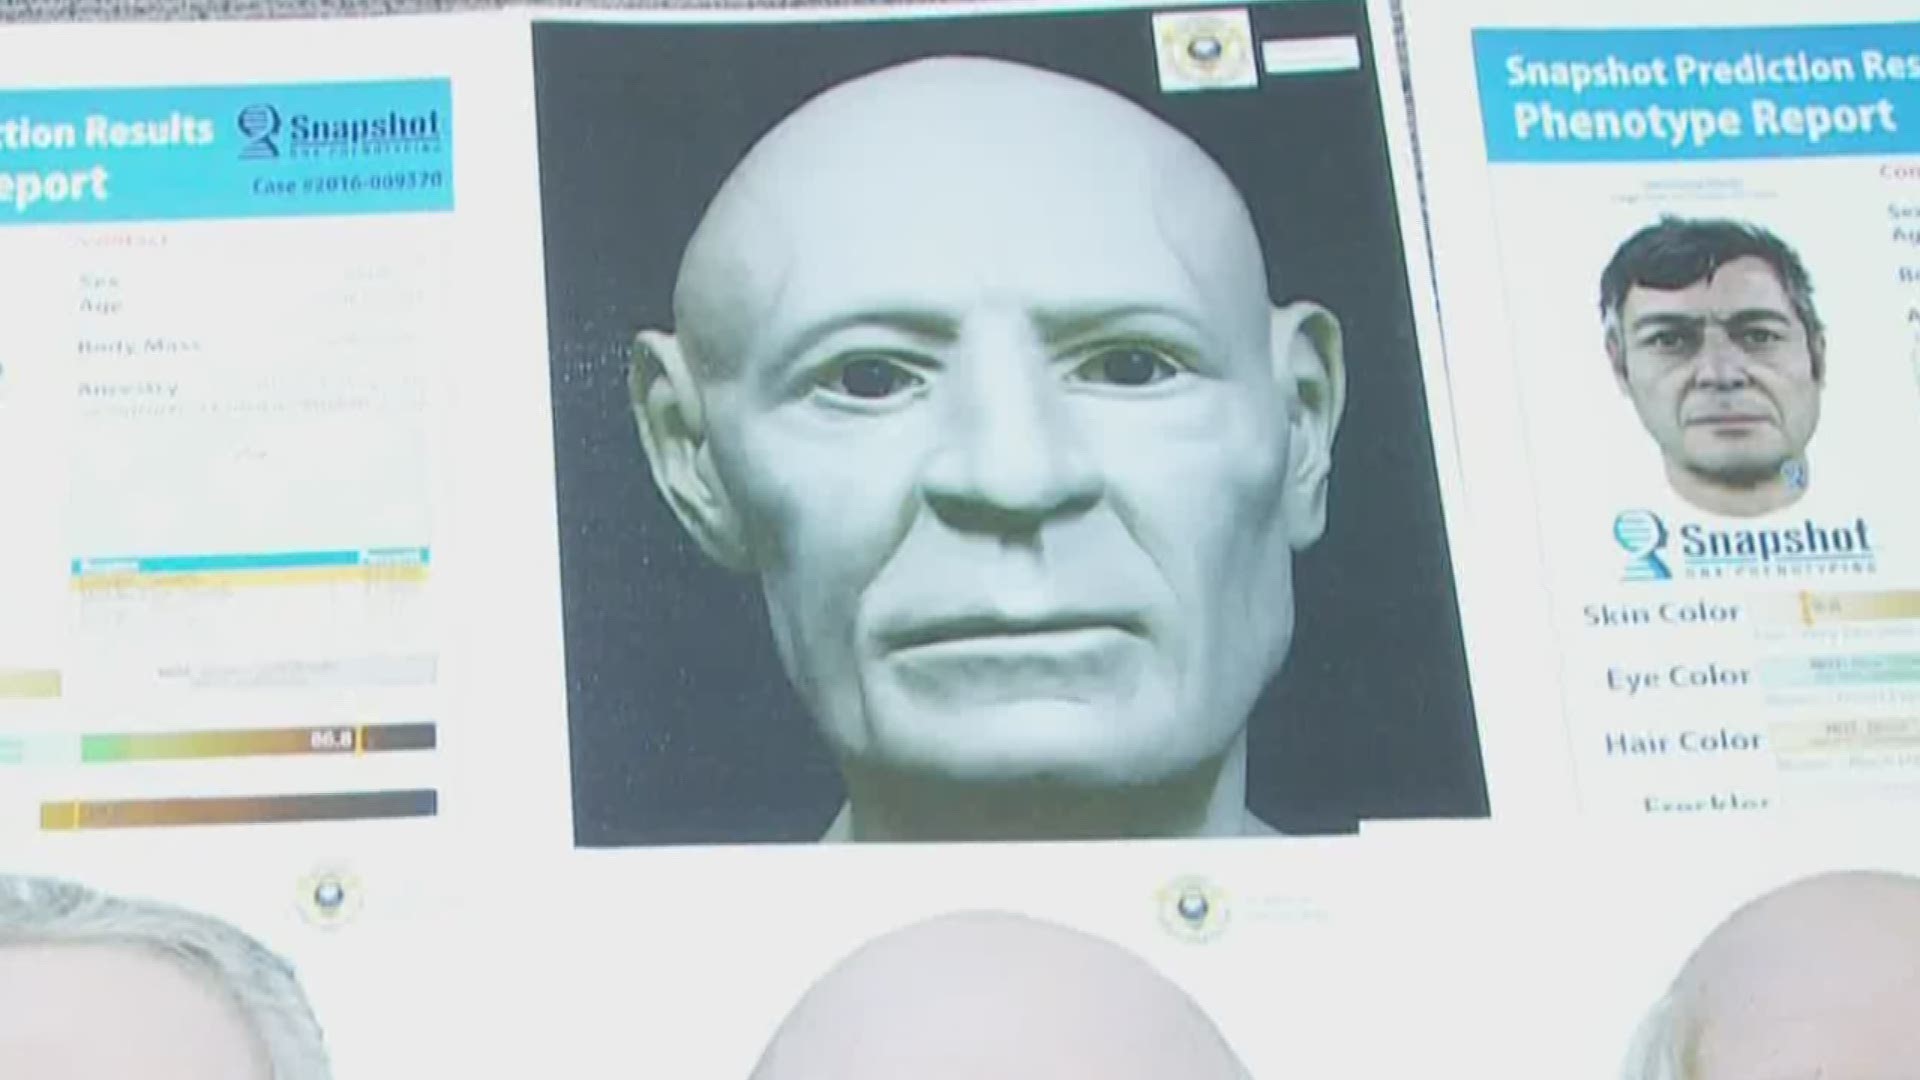 The recreation of the face of a man whose skull was found in a remote area in Slidell in 2016 has been made by the FACES program in an effort to identify him, according to the St. Tammany Coroner's Office.